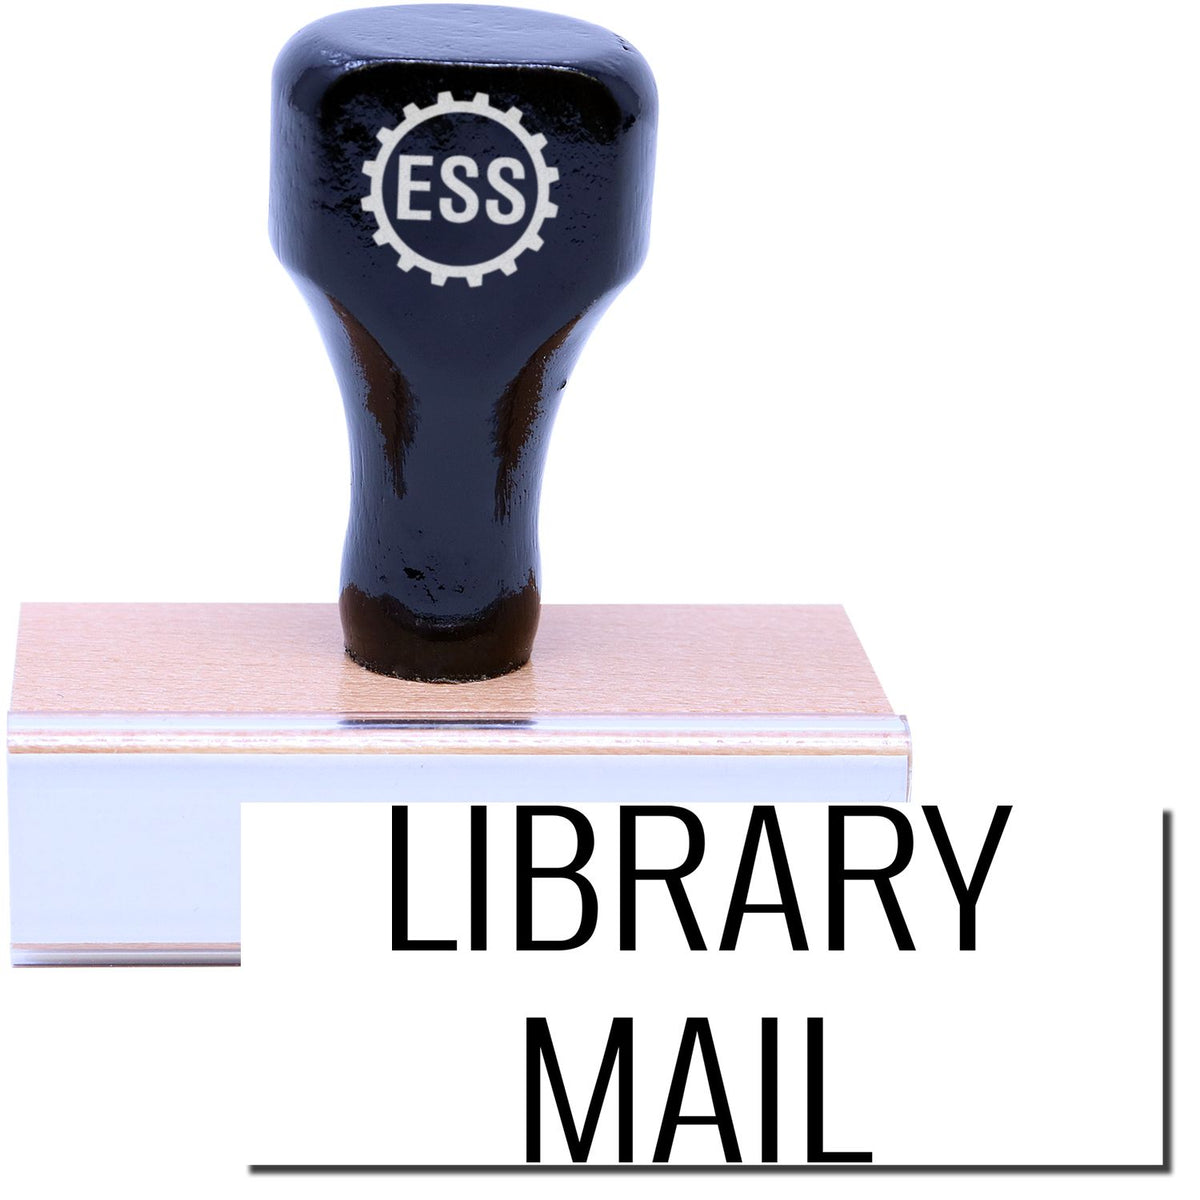 A stock office rubber stamp with a stamped image showing how the text &quot;LIBRARY MAIL&quot; is displayed after stamping.